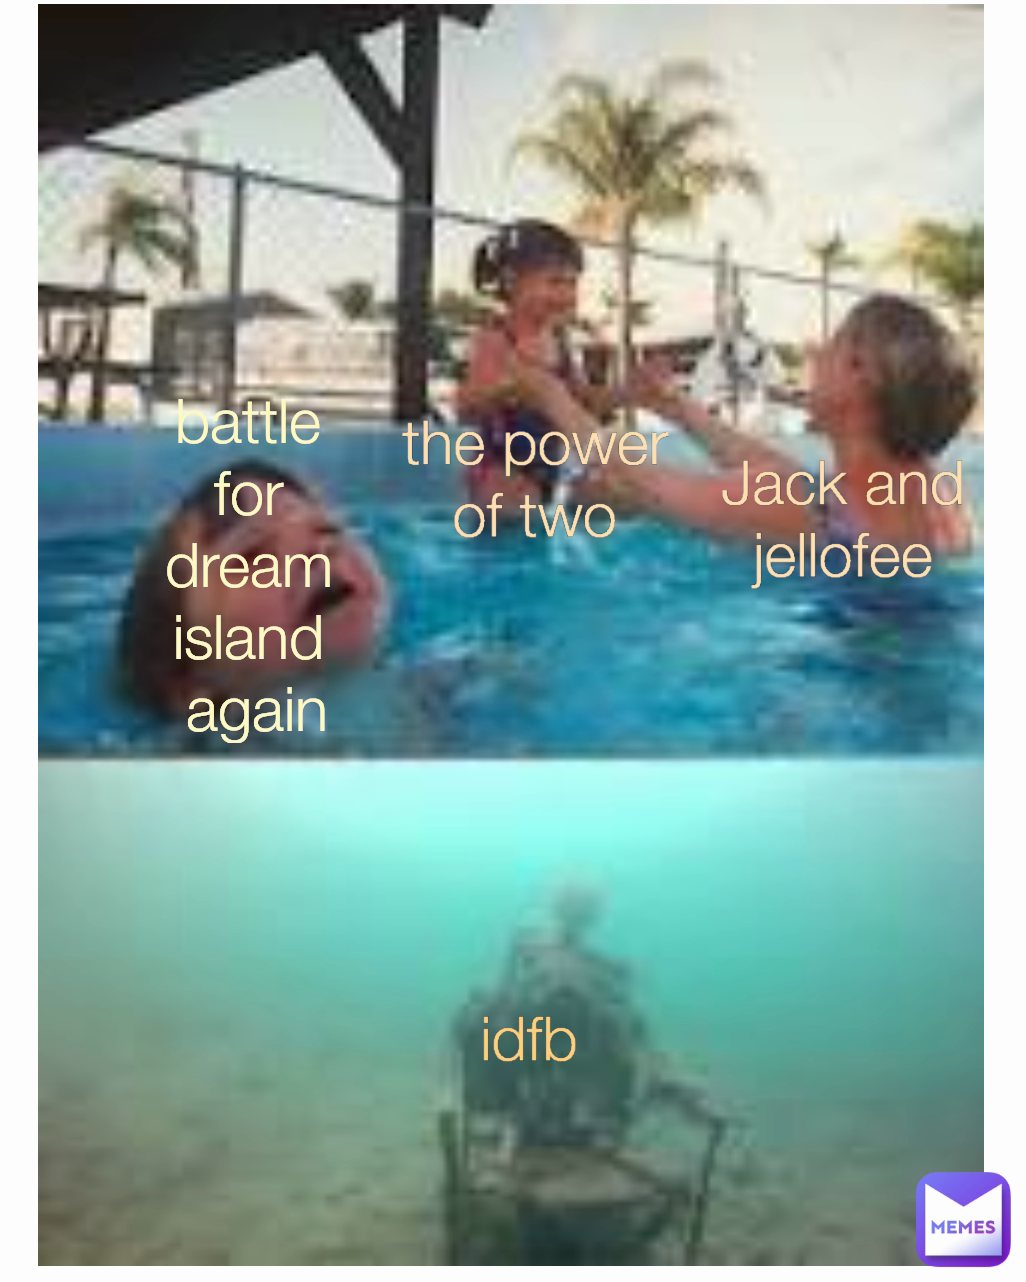 Jack and jellofee the power of two idfb battle for dream island
 again